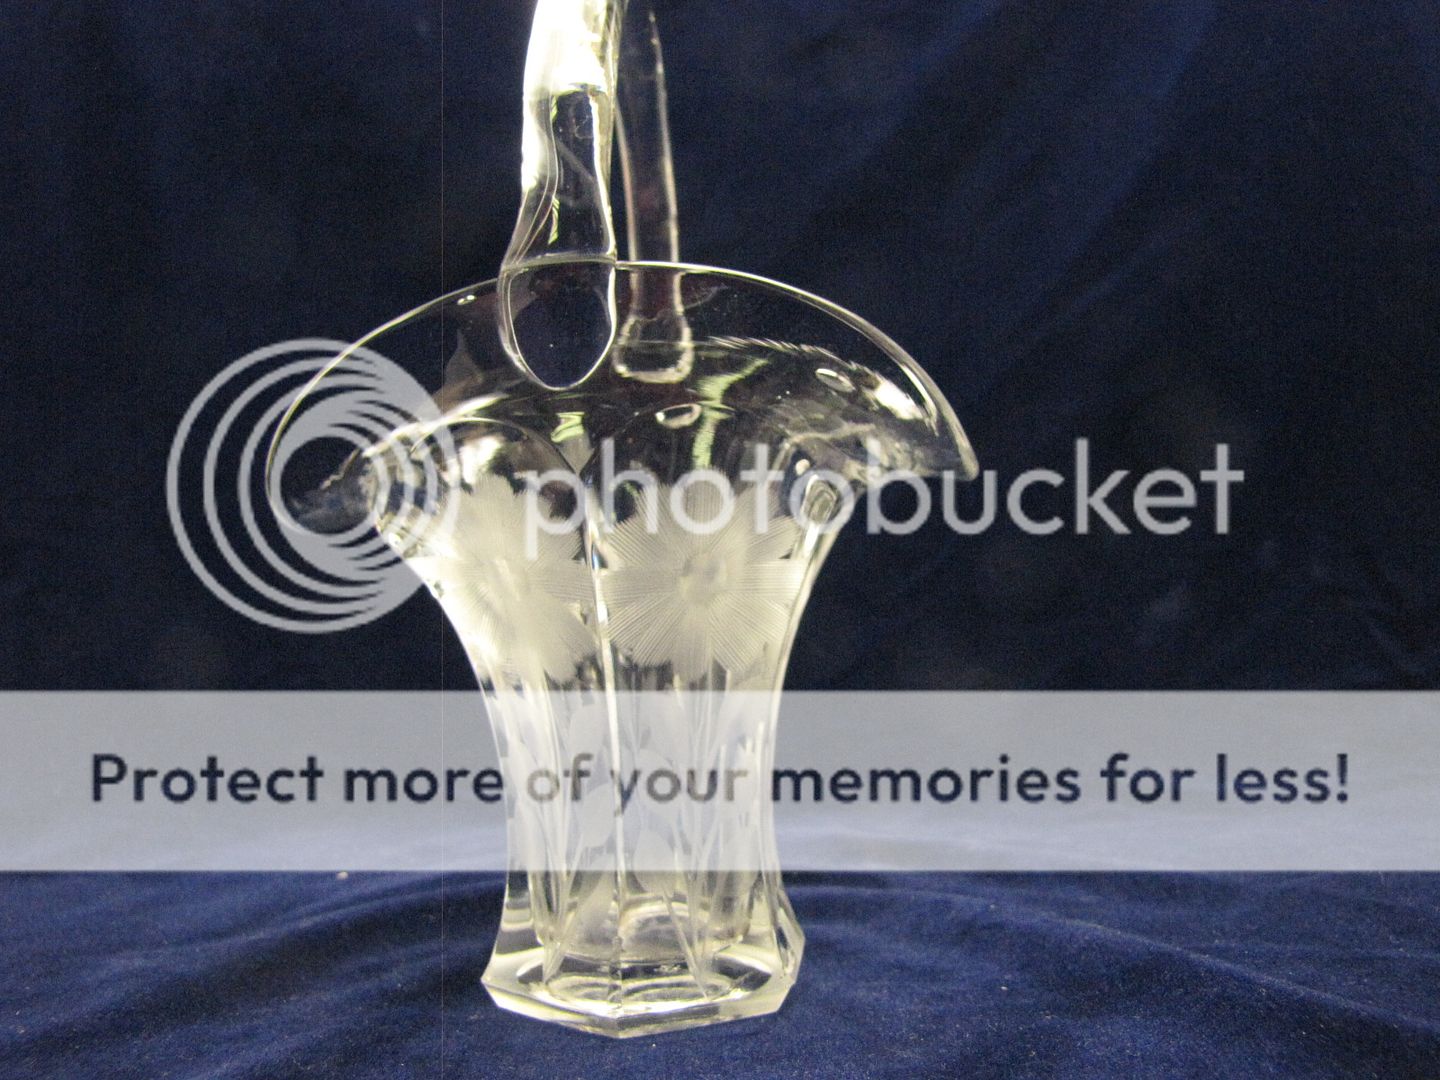 Small Clear Glass Etched Flower Basket Style Vase  